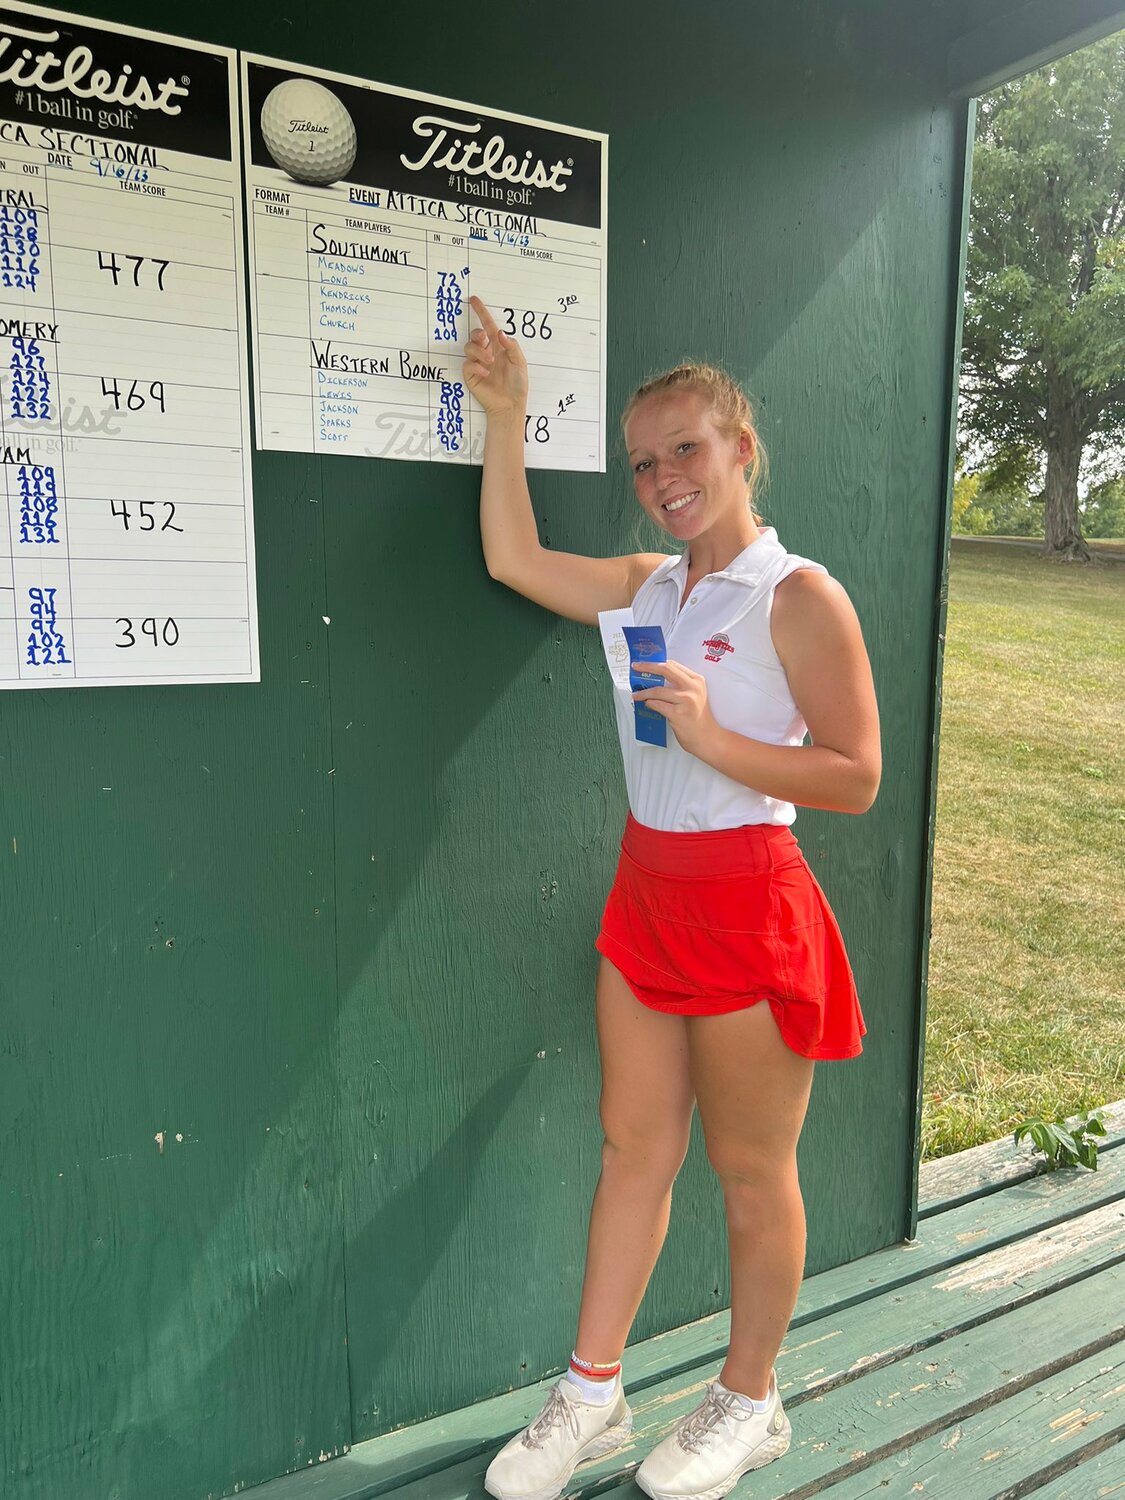 Addison Meadows fired a 72 to earn medalist at the Attica sectional for the 3rd straight season.